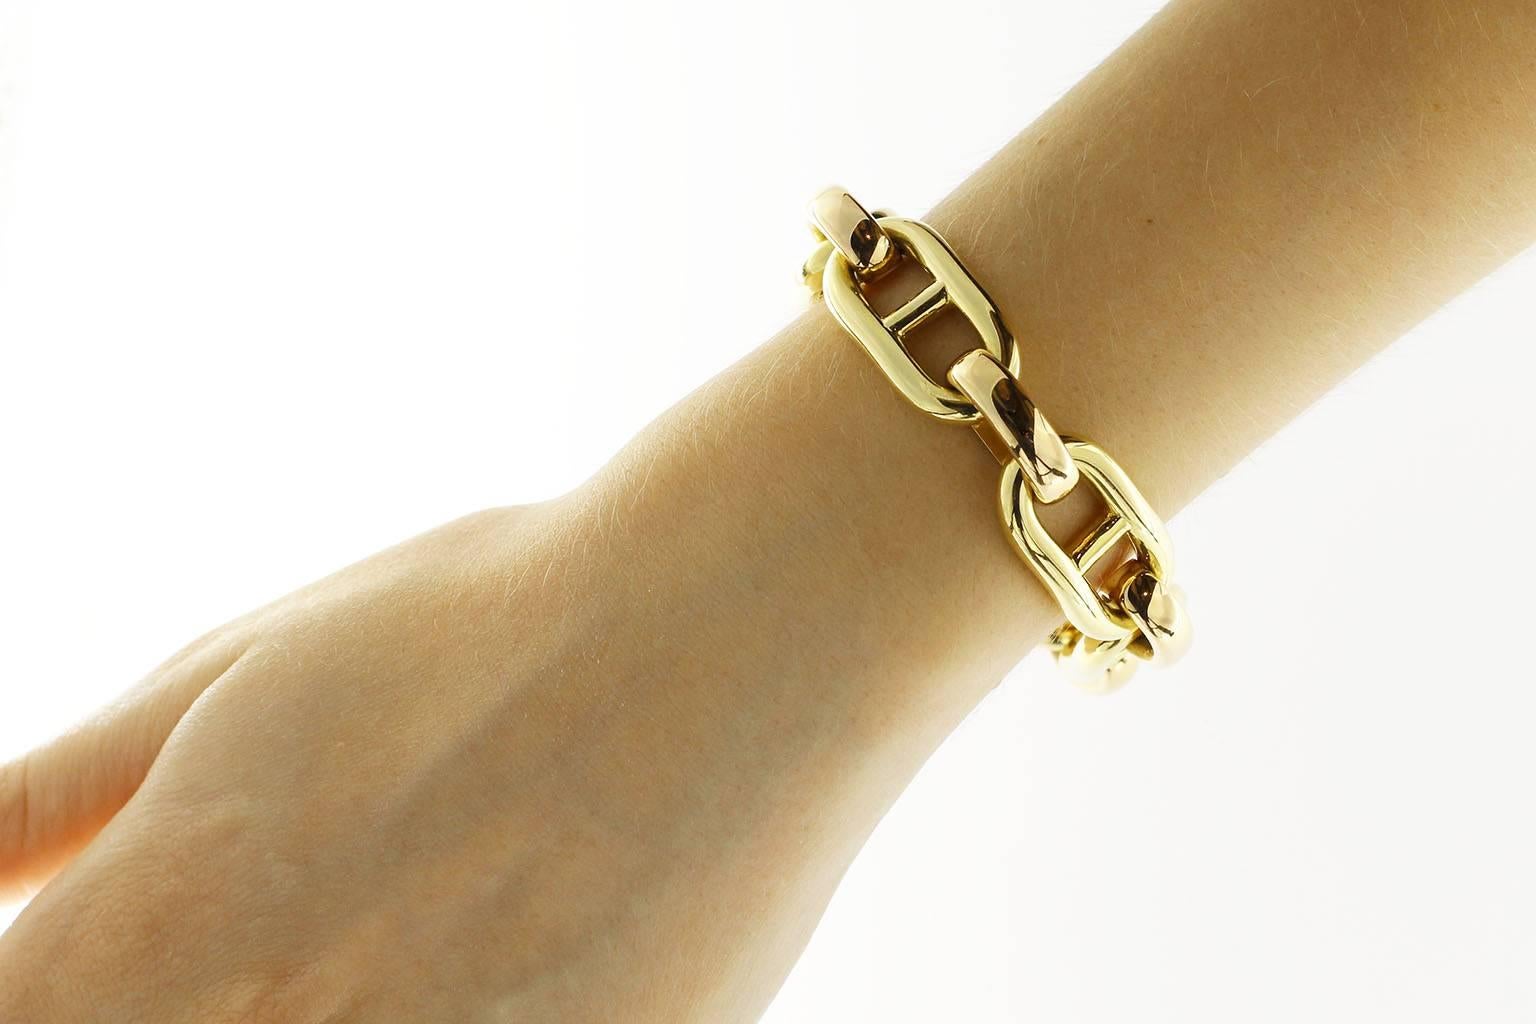 Jona design collection, hand crafted in Italy, Chaine d'Ancre 18 karat yellow and rose gold link bracelet, 21cm long.

All Jona jewelry is new and has never been previously owned or worn. Each item will arrive at your door beautifully gift wrapped